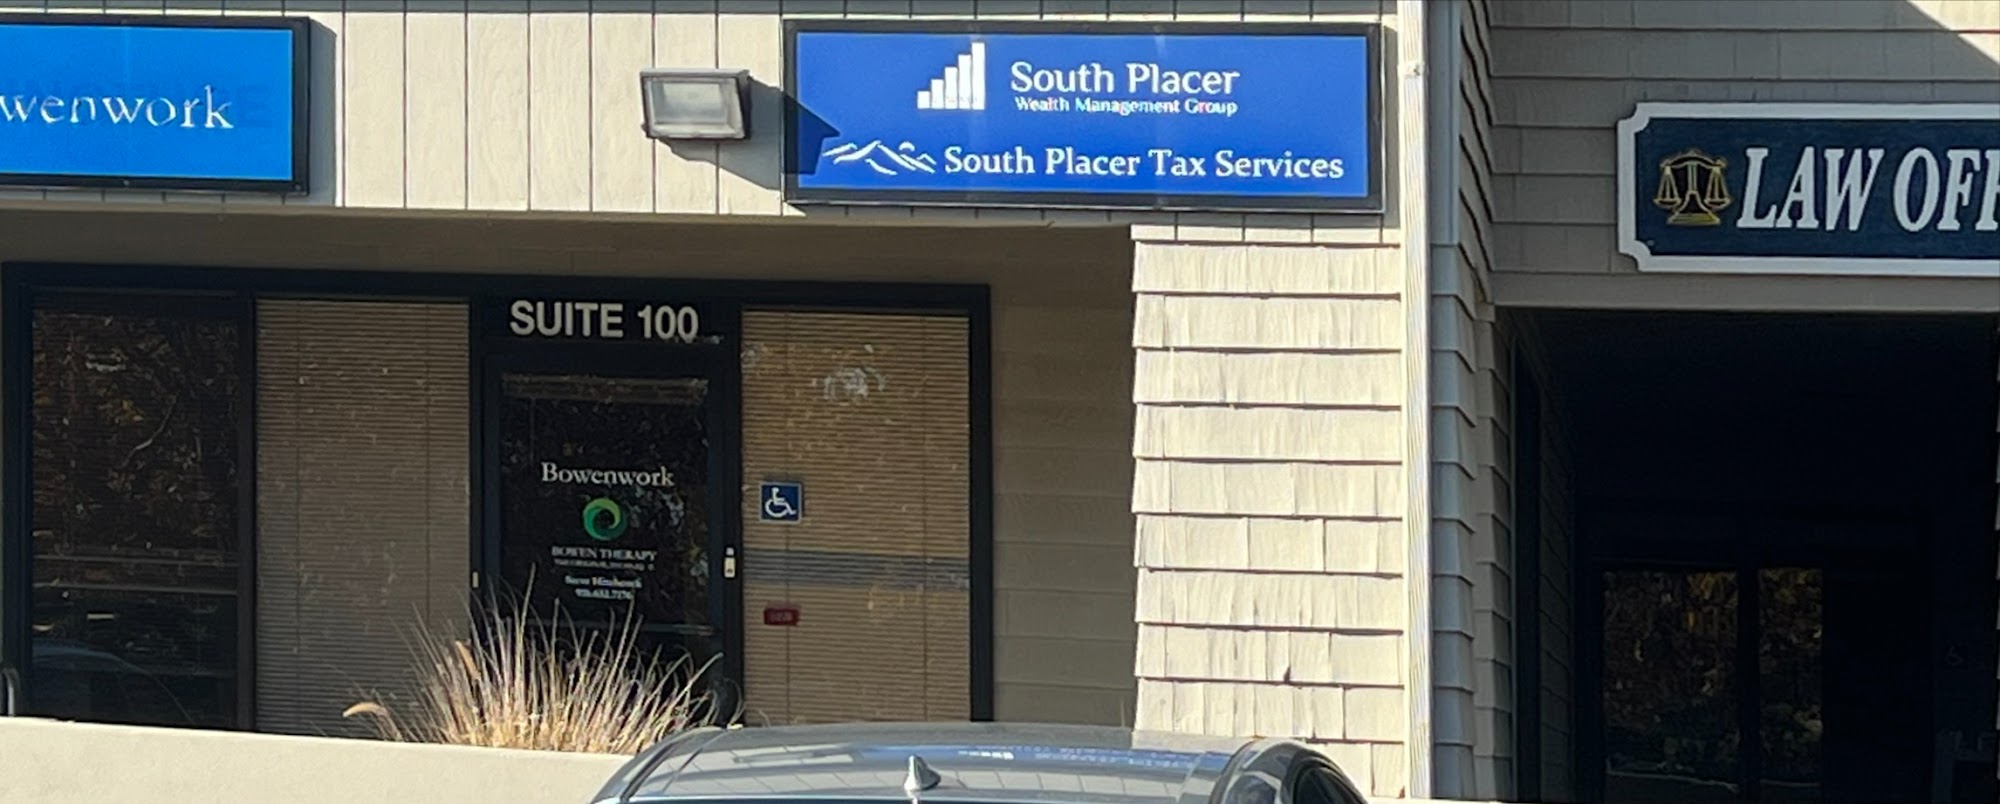 South Placer Tax & Bookkeeping Services